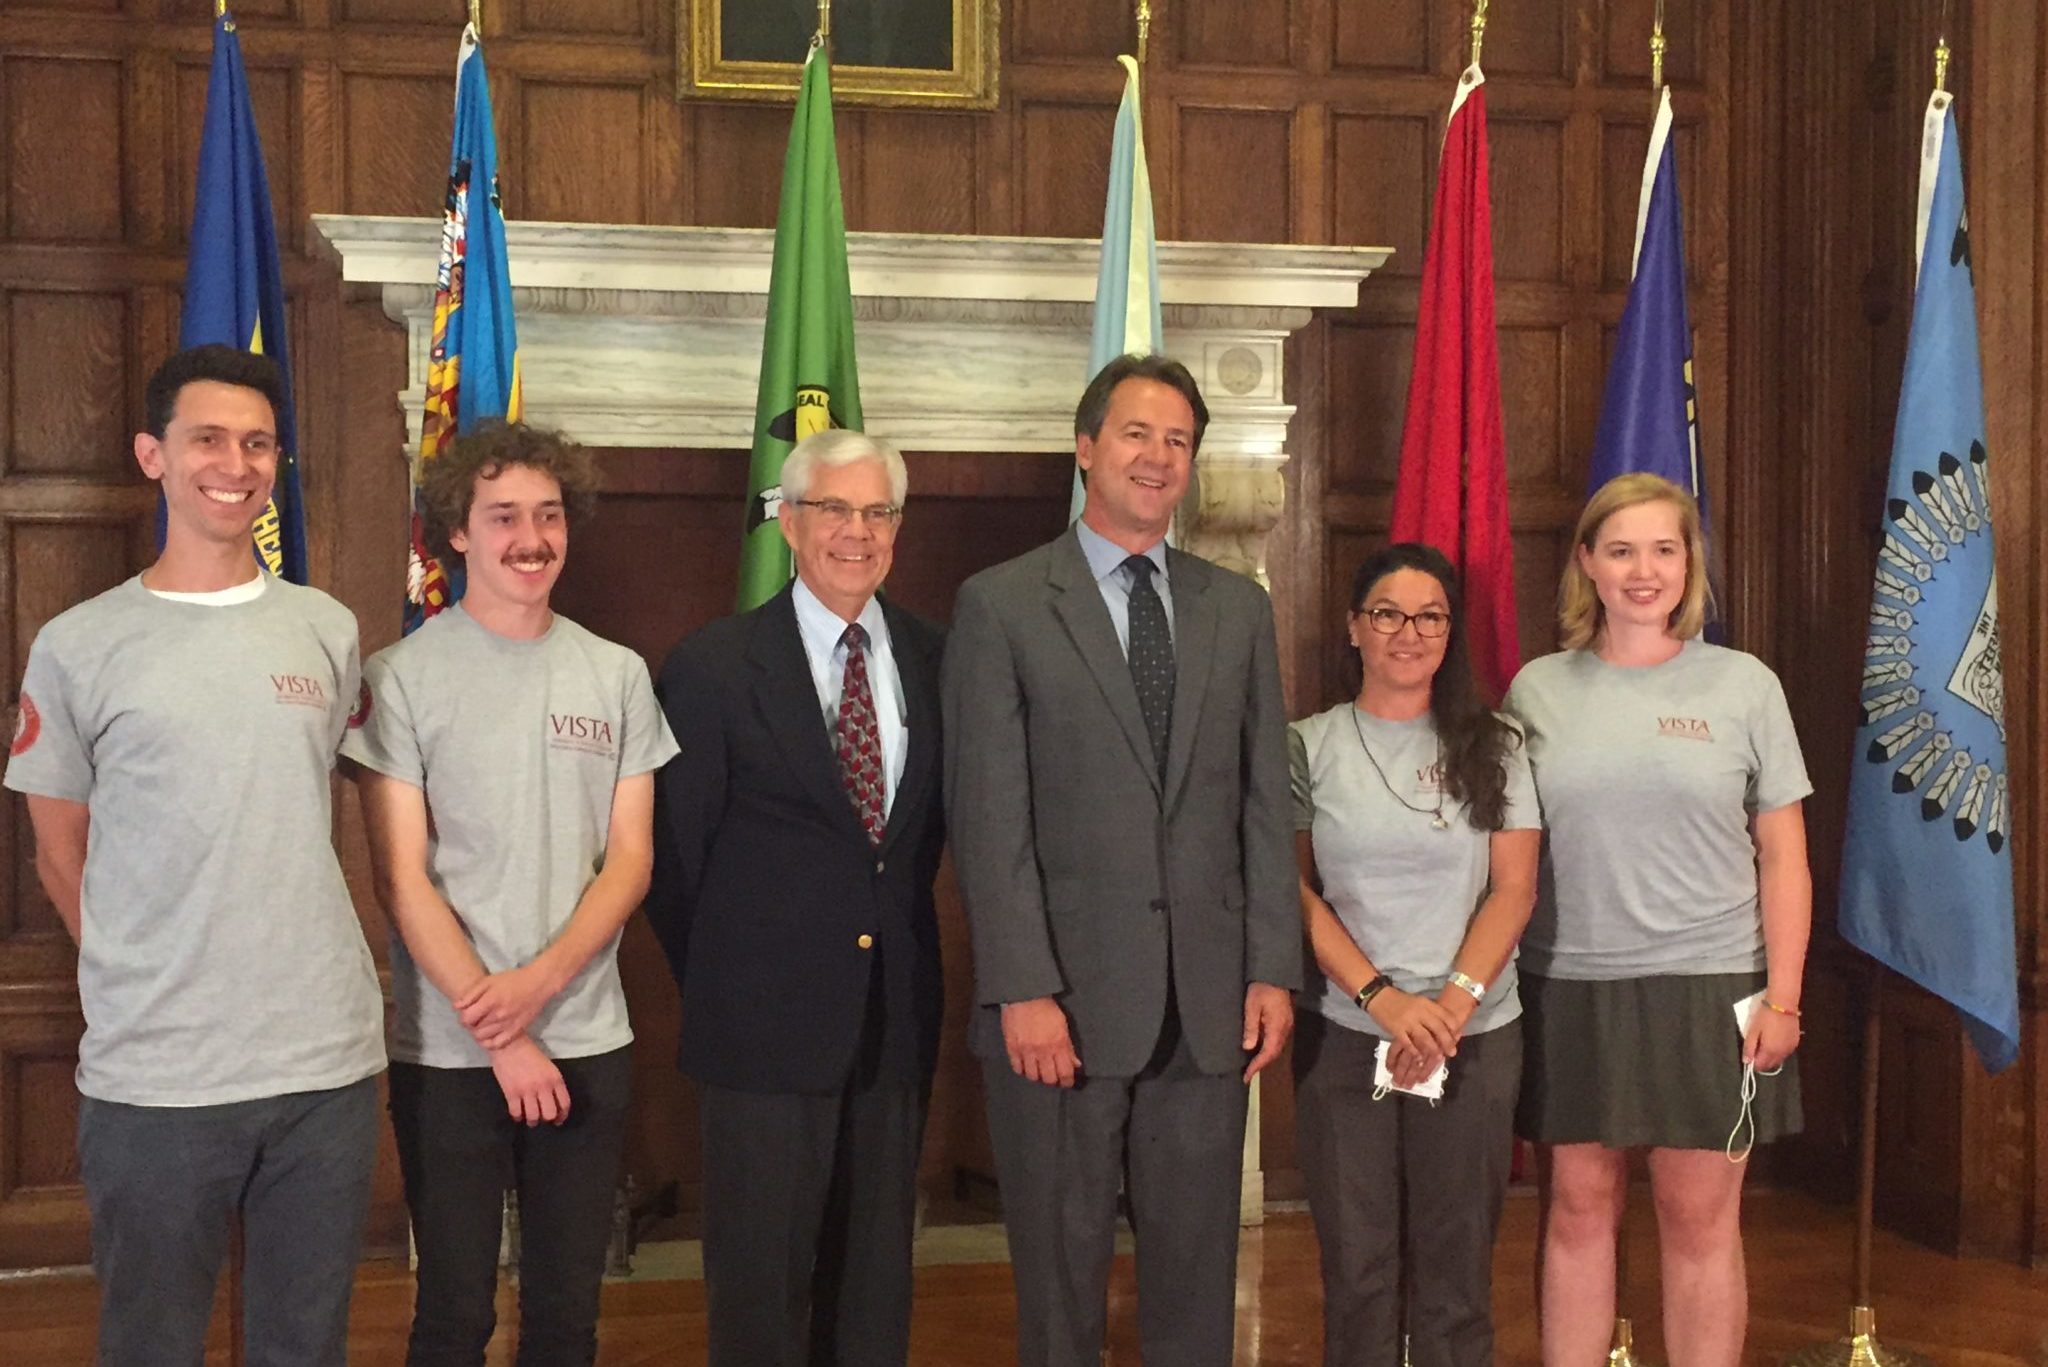 Former Governor of Montana Steve Bullock and Former Lieutenant Governor Mike Cooney posing with a group of AmeriCorps members in the Montana state capital building